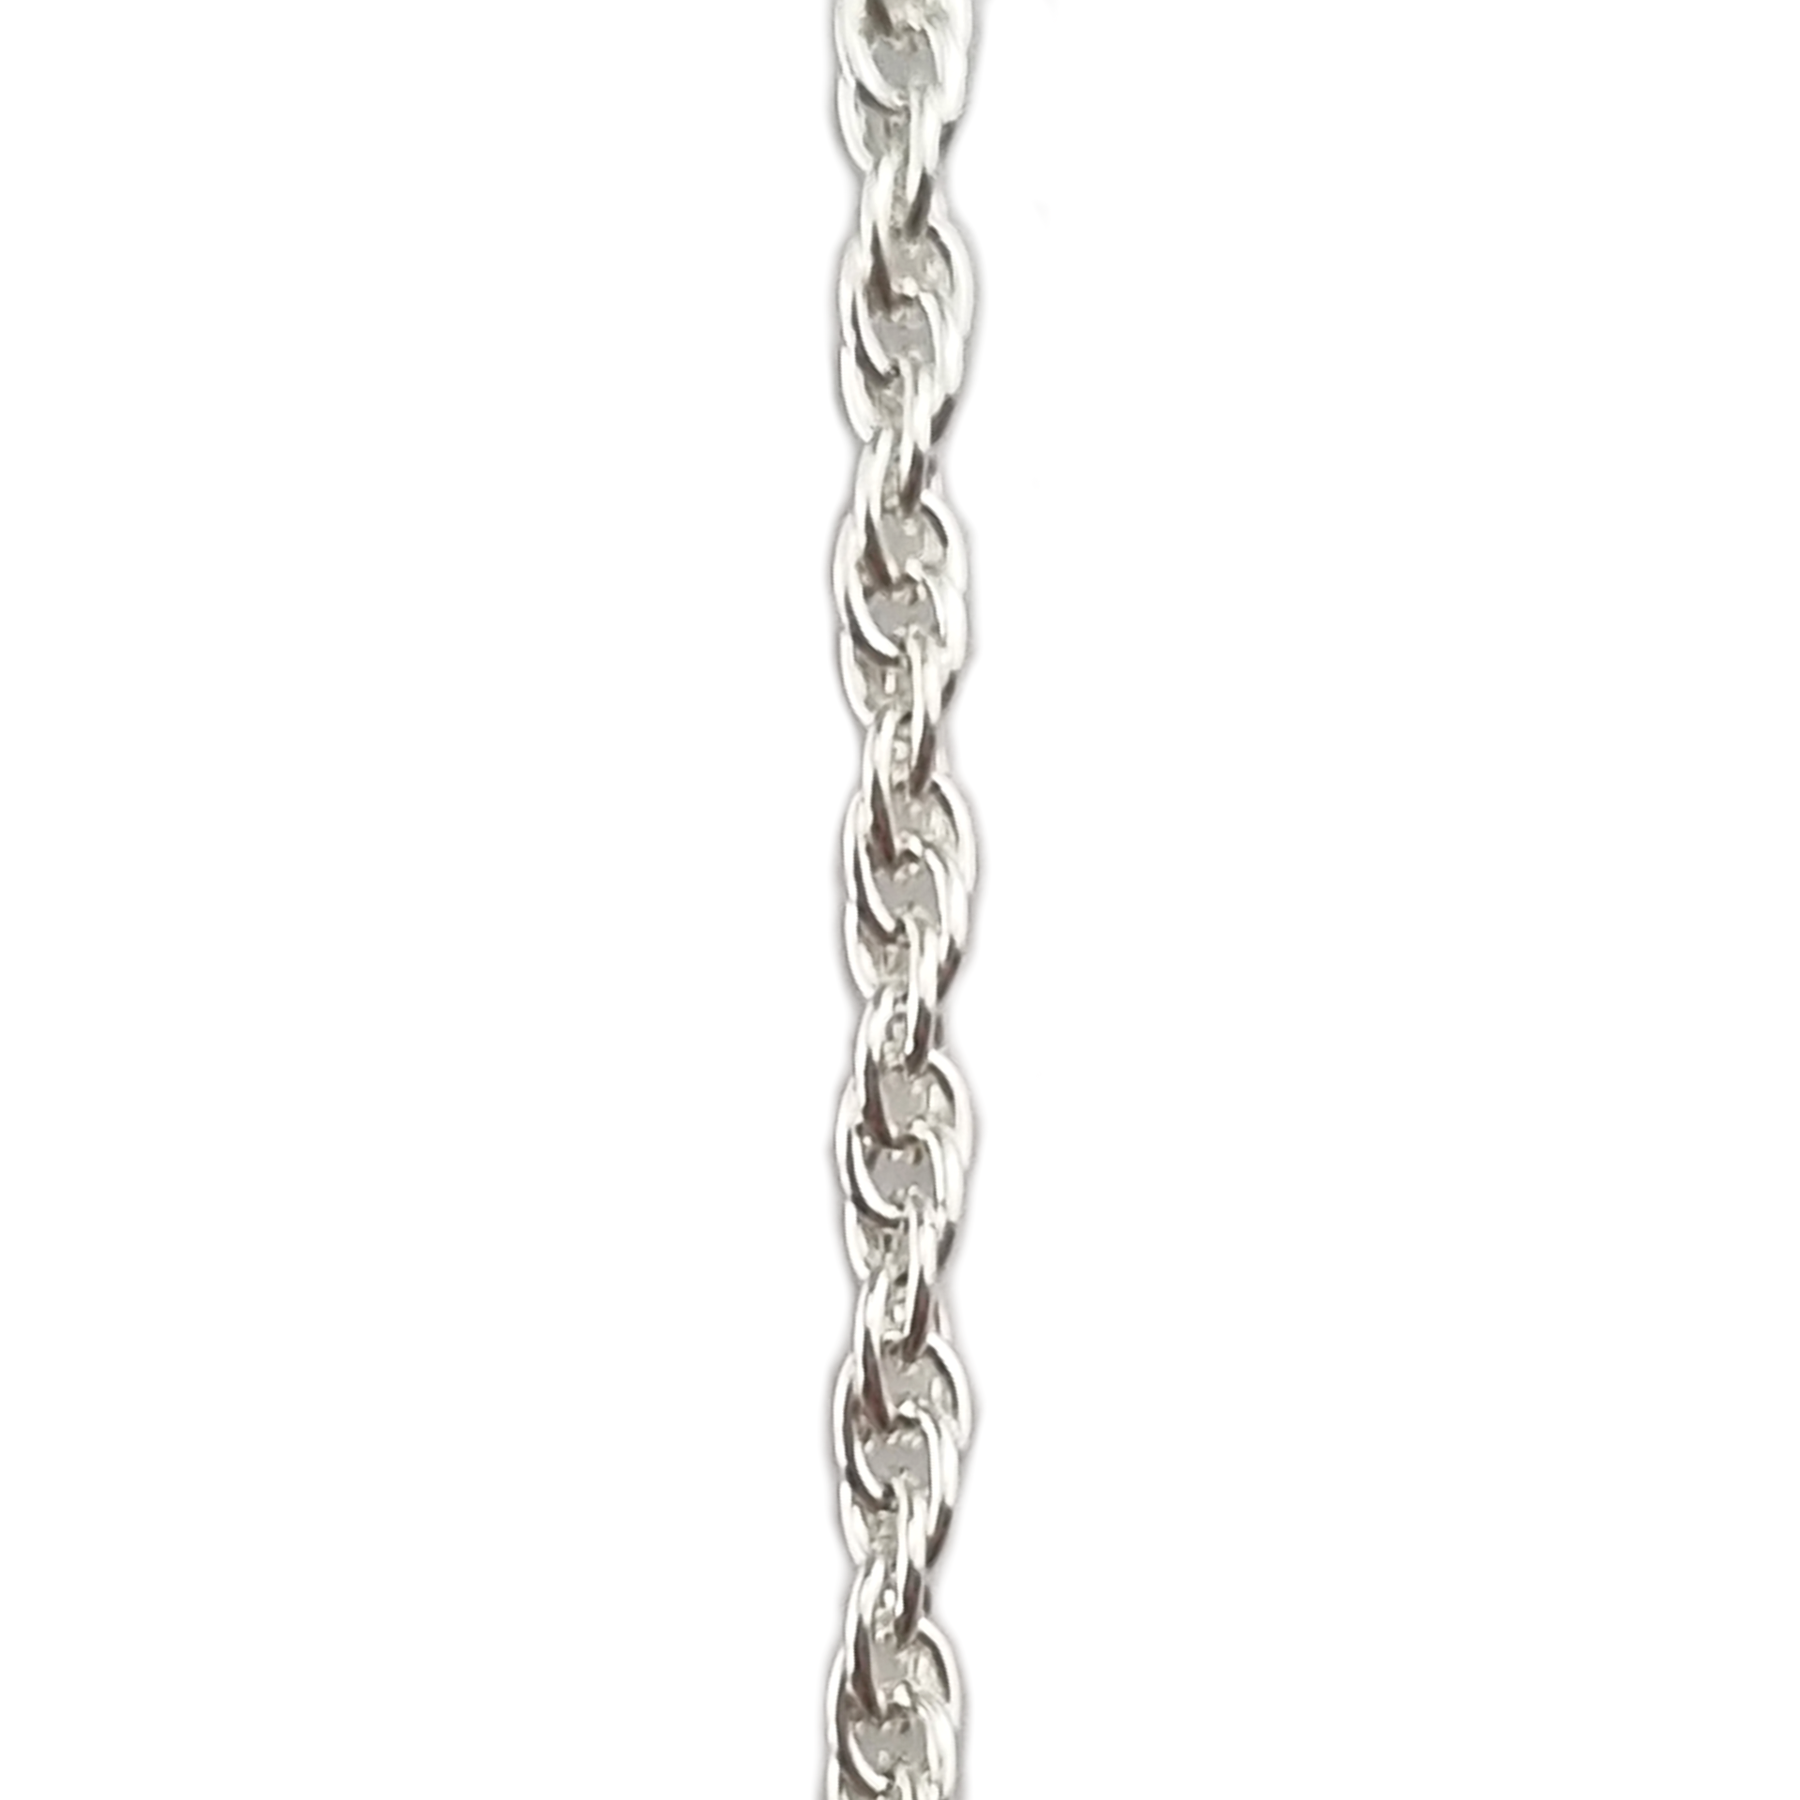 Double Trace Chain - Silver Plated - qty: 25-metres. Shop jewellery chain online. Australia wide shipping. Chain.com.au